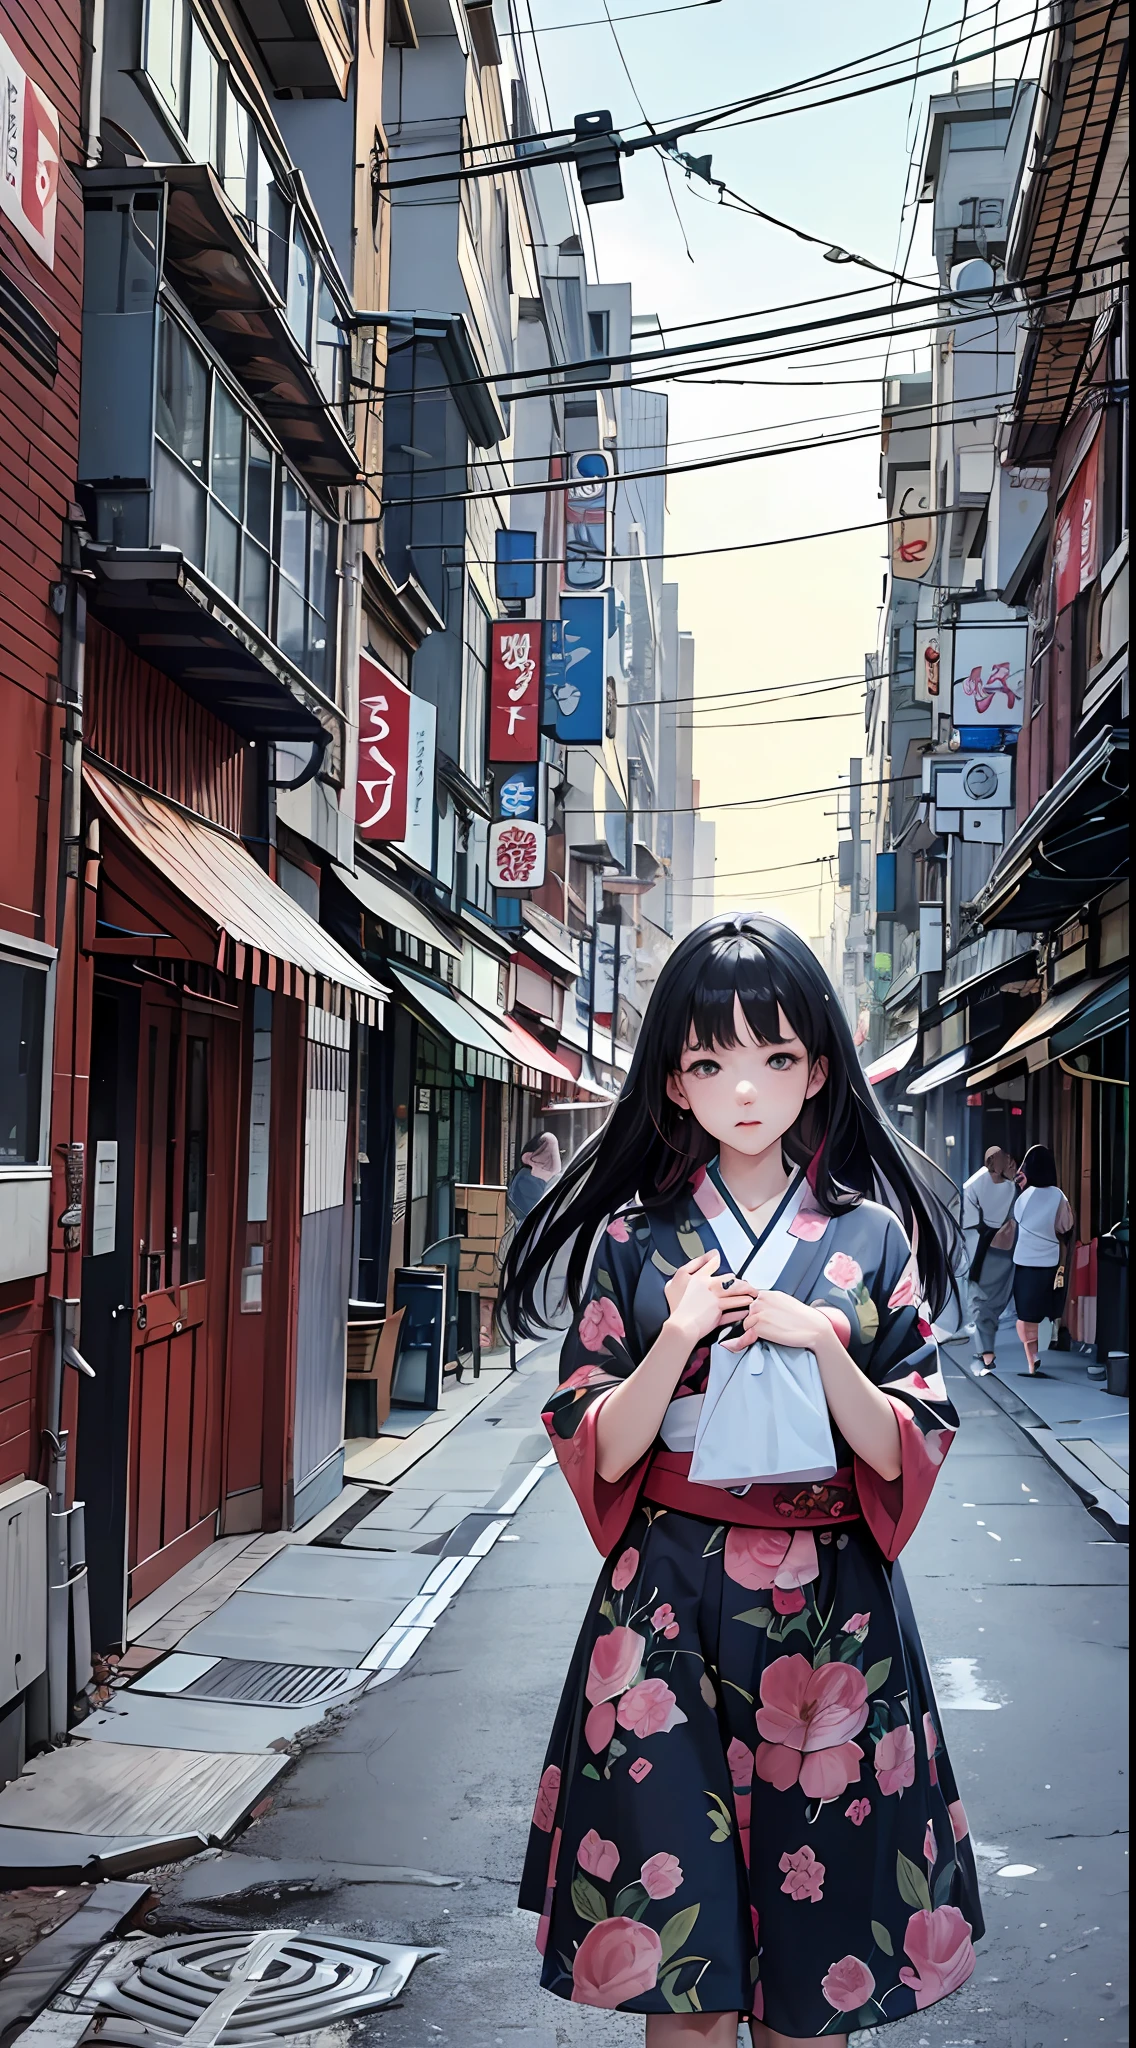 ((best quality))), (((masterpiece))), ((perfect face)),nsfw,One woman, long black hair, in the city, hiding behind a telephone pole, trying not to be found, looking at us, embarrassed, curious, unrequited love, Showa era Japan, nostalgic,teasing, bashful,((confesses and runs away)),